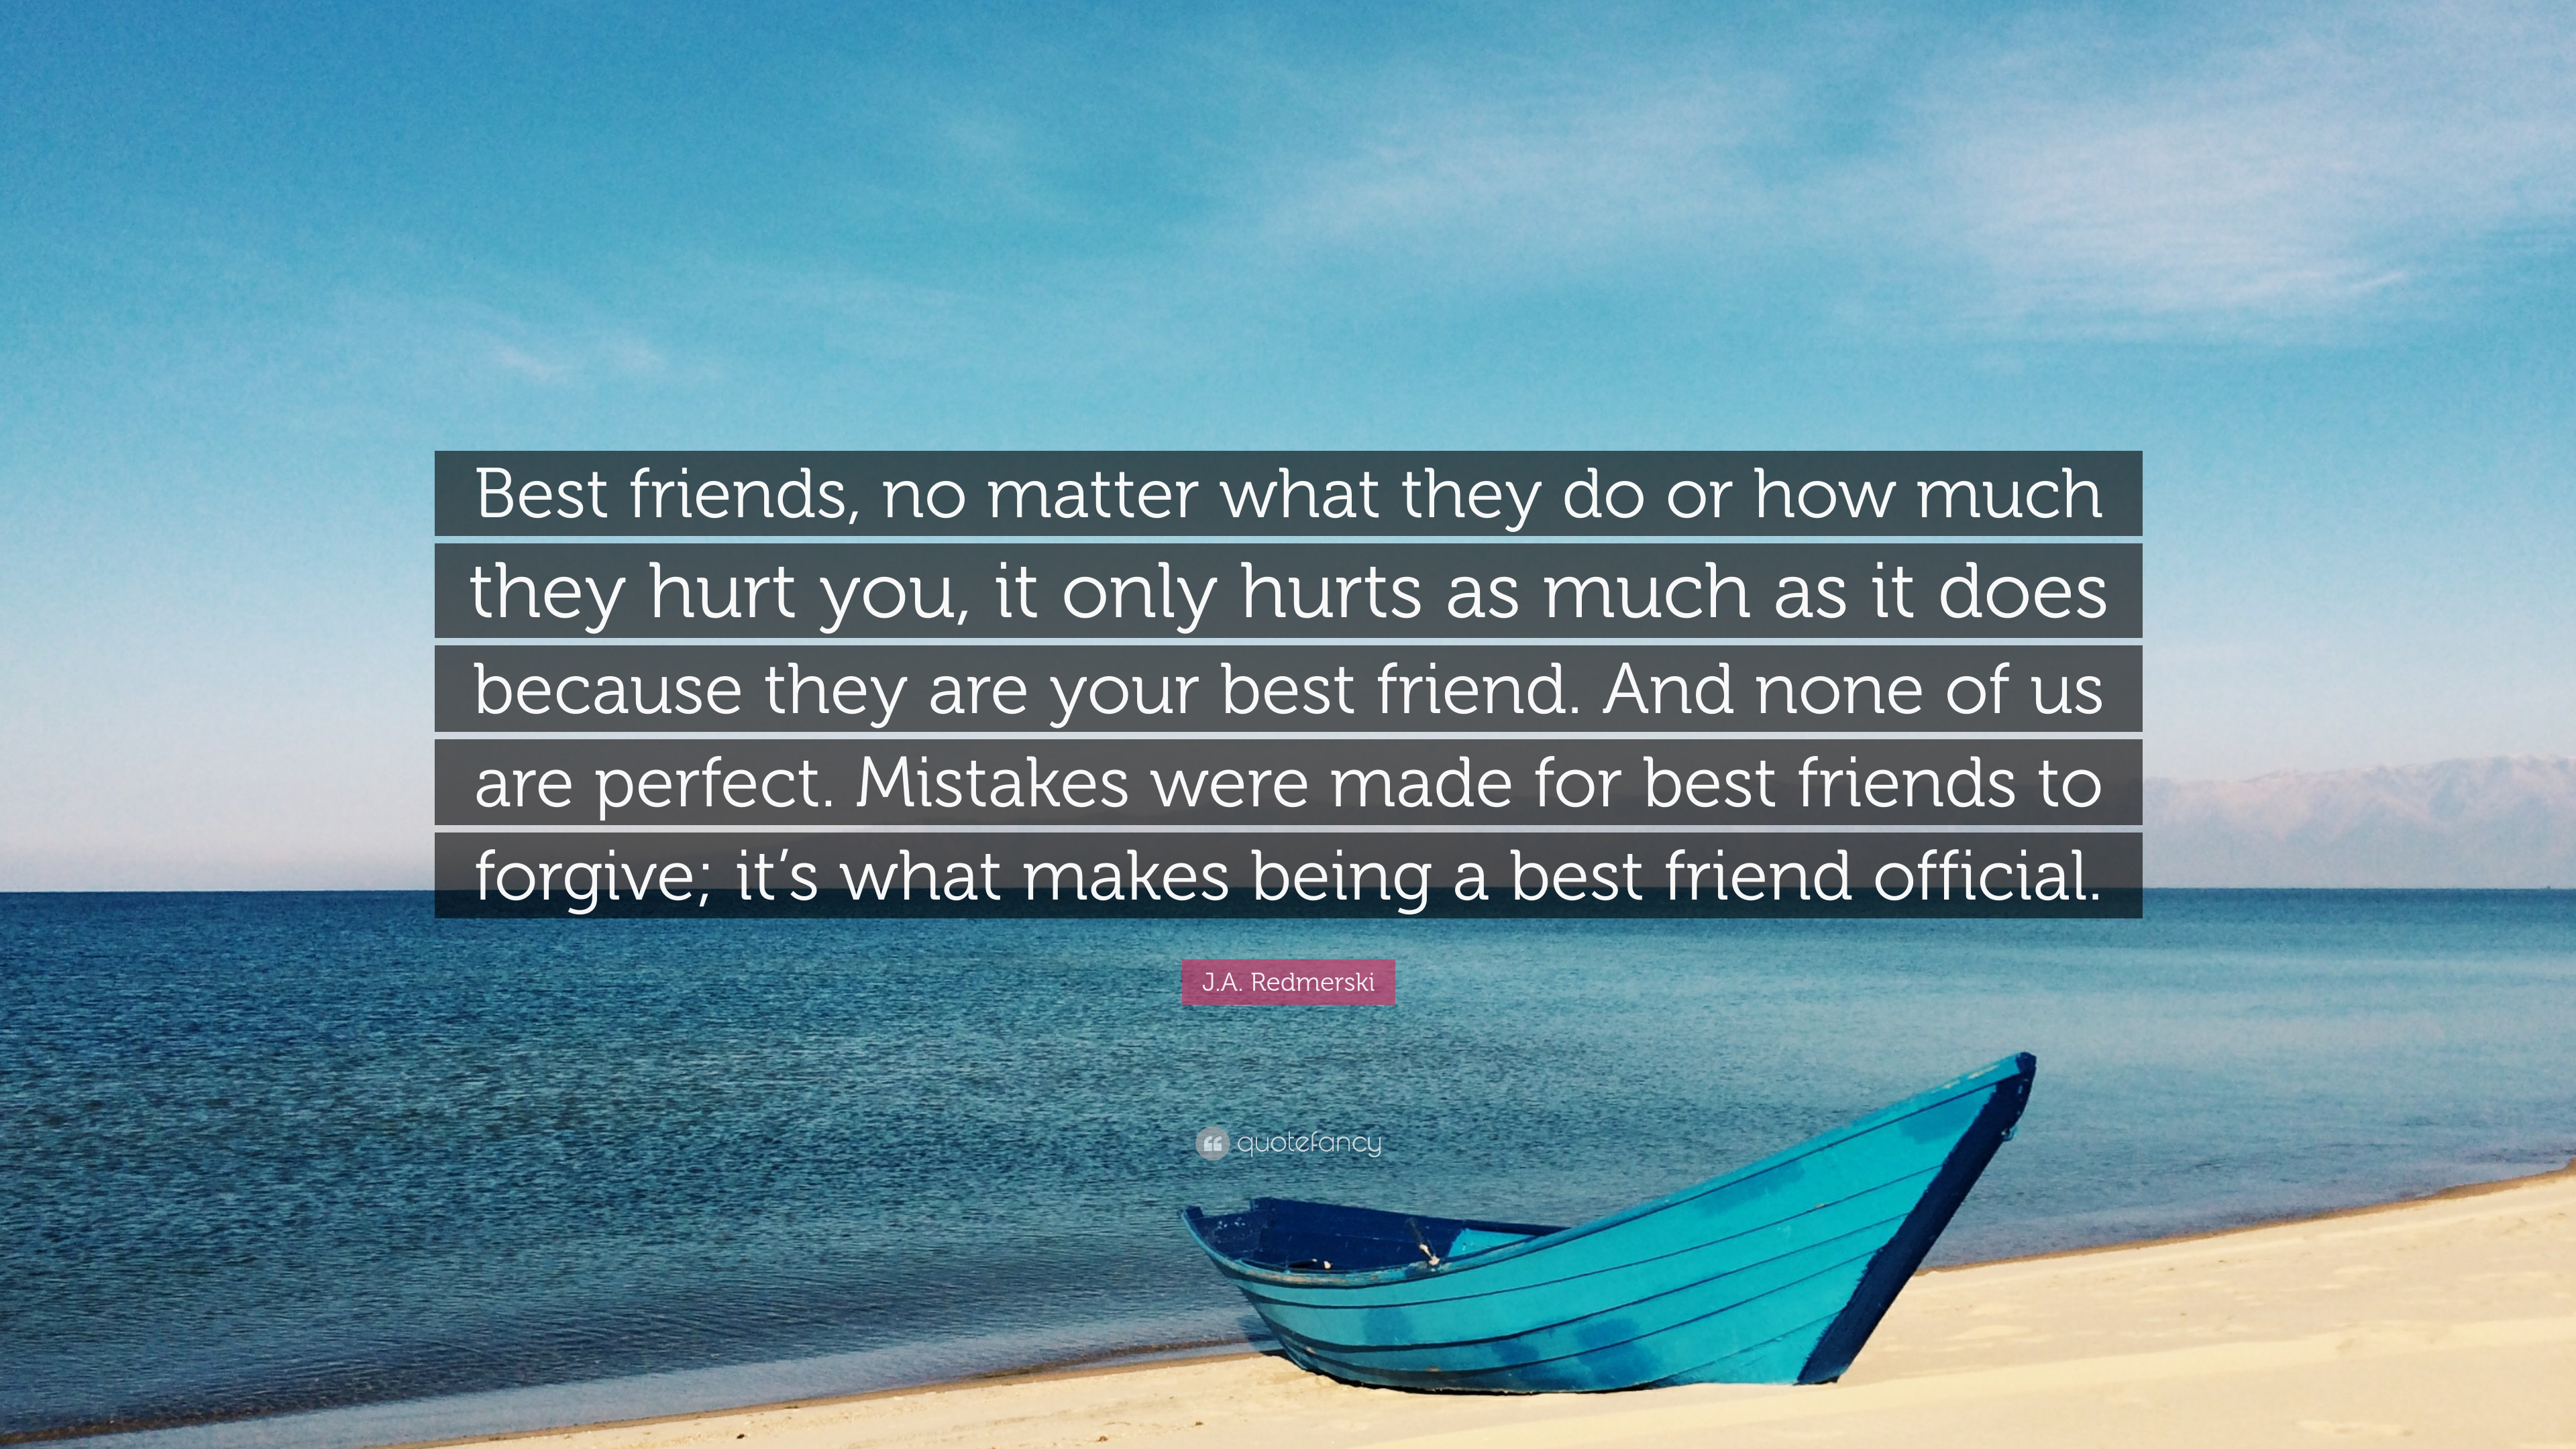 J.A. Redmerski Quote: “Best friends, no matter what they do or how much they hurt you, it only hurts as much as it does because they are your b.”